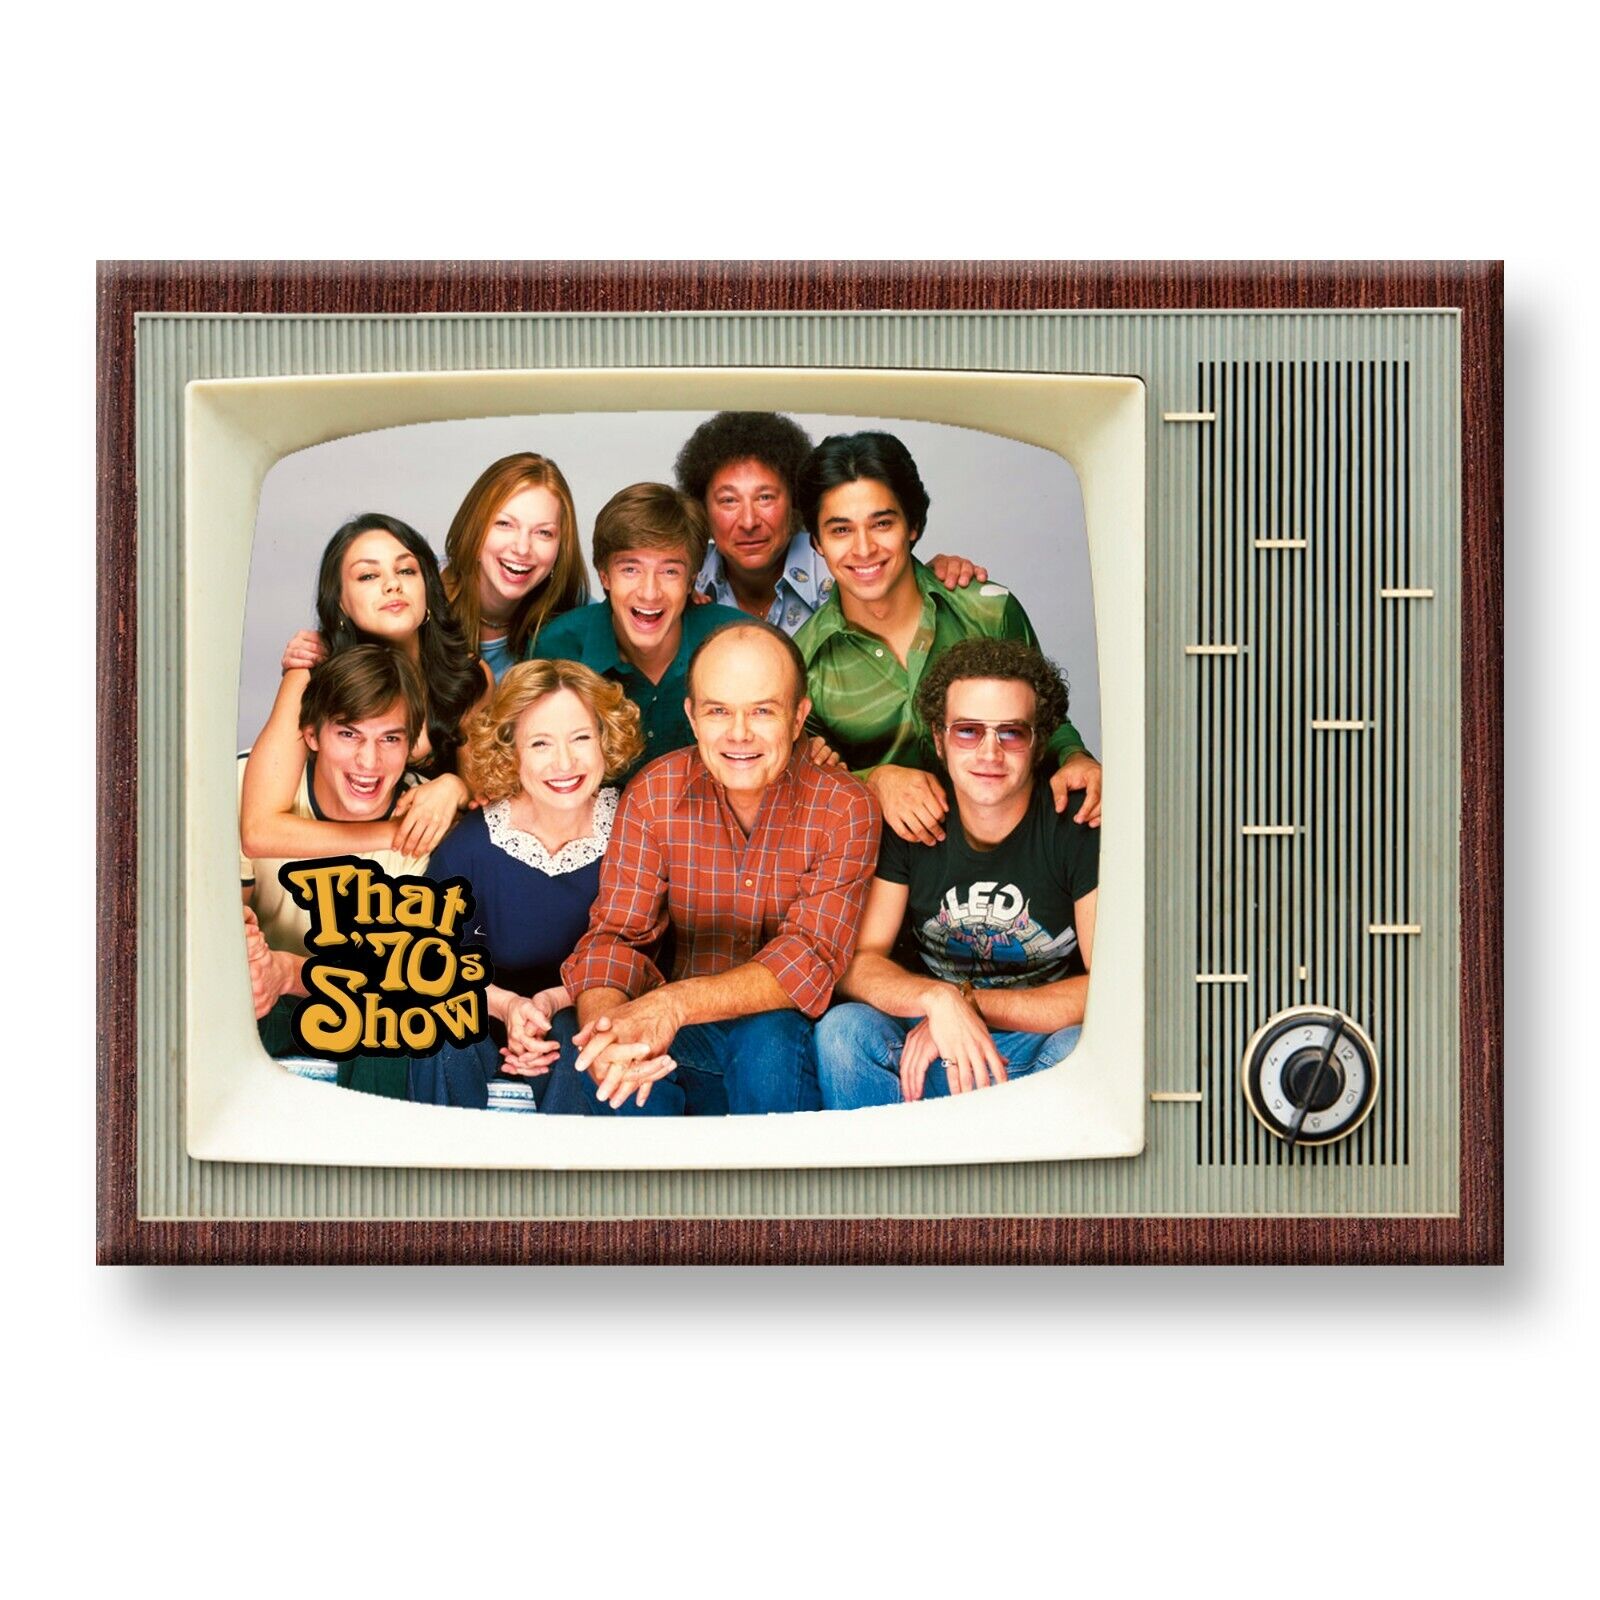 THAT 70s SHOW TV Show Classic TV 3.5 inches x 2.5 inches FRIDGE MAGNET